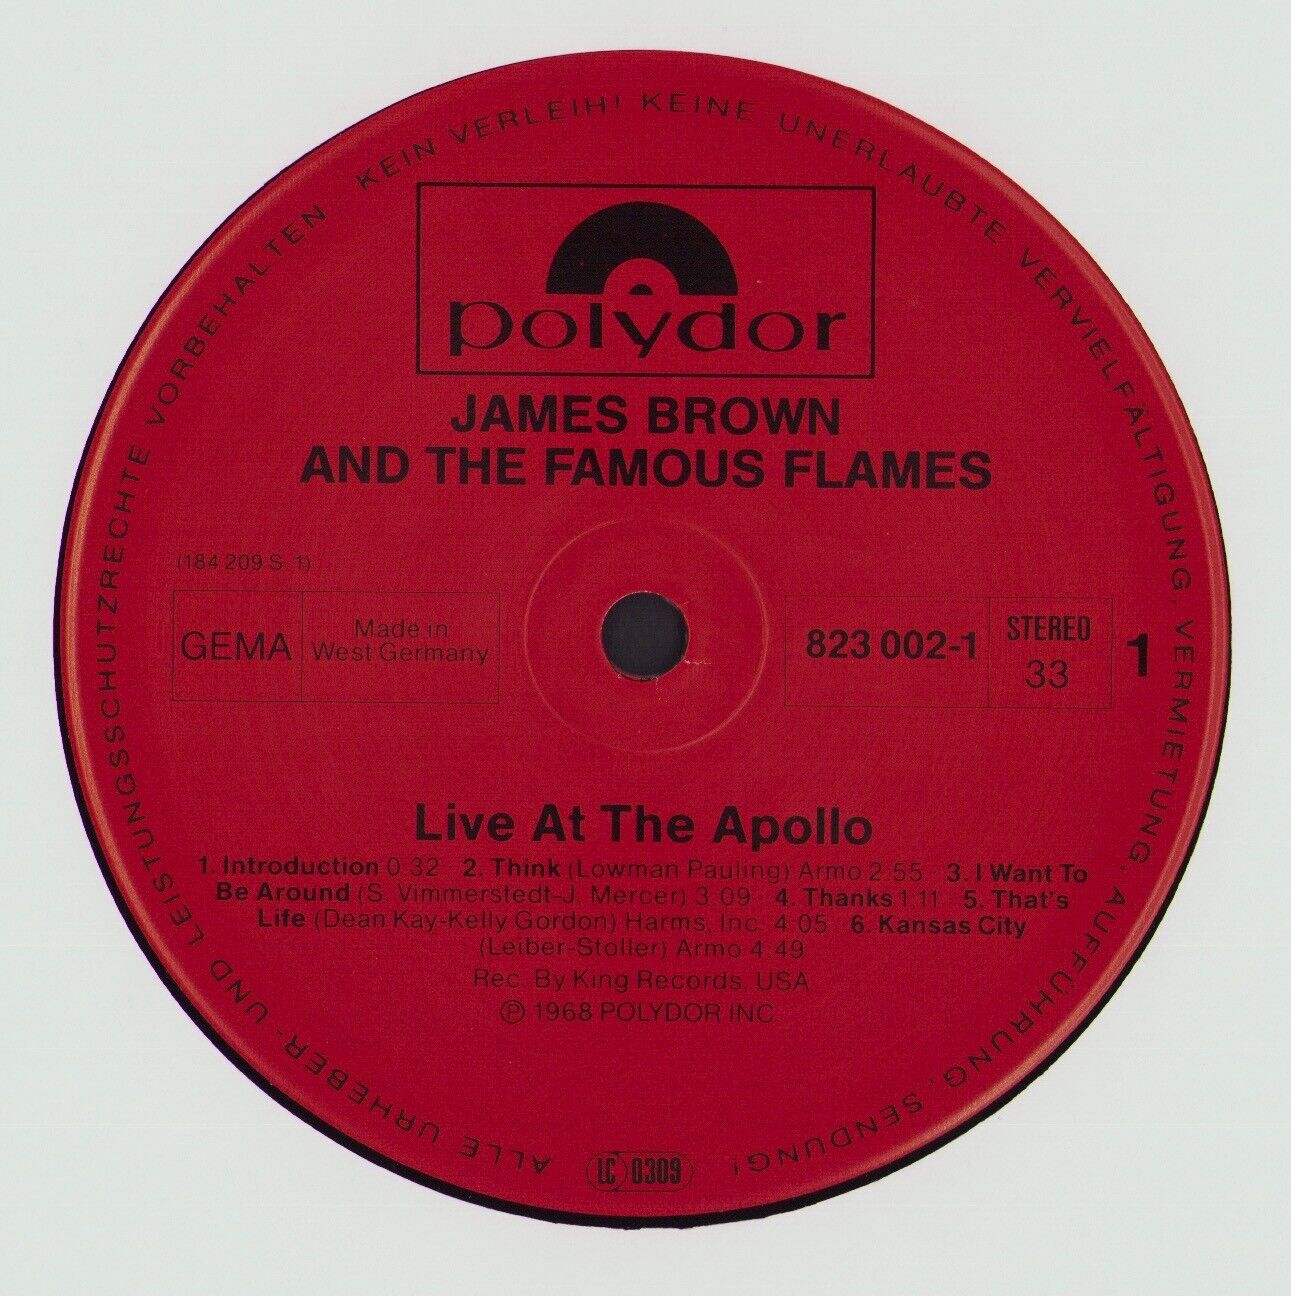 James Brown And The Famous Flames - Live At The Apollo Vinyl 2LP